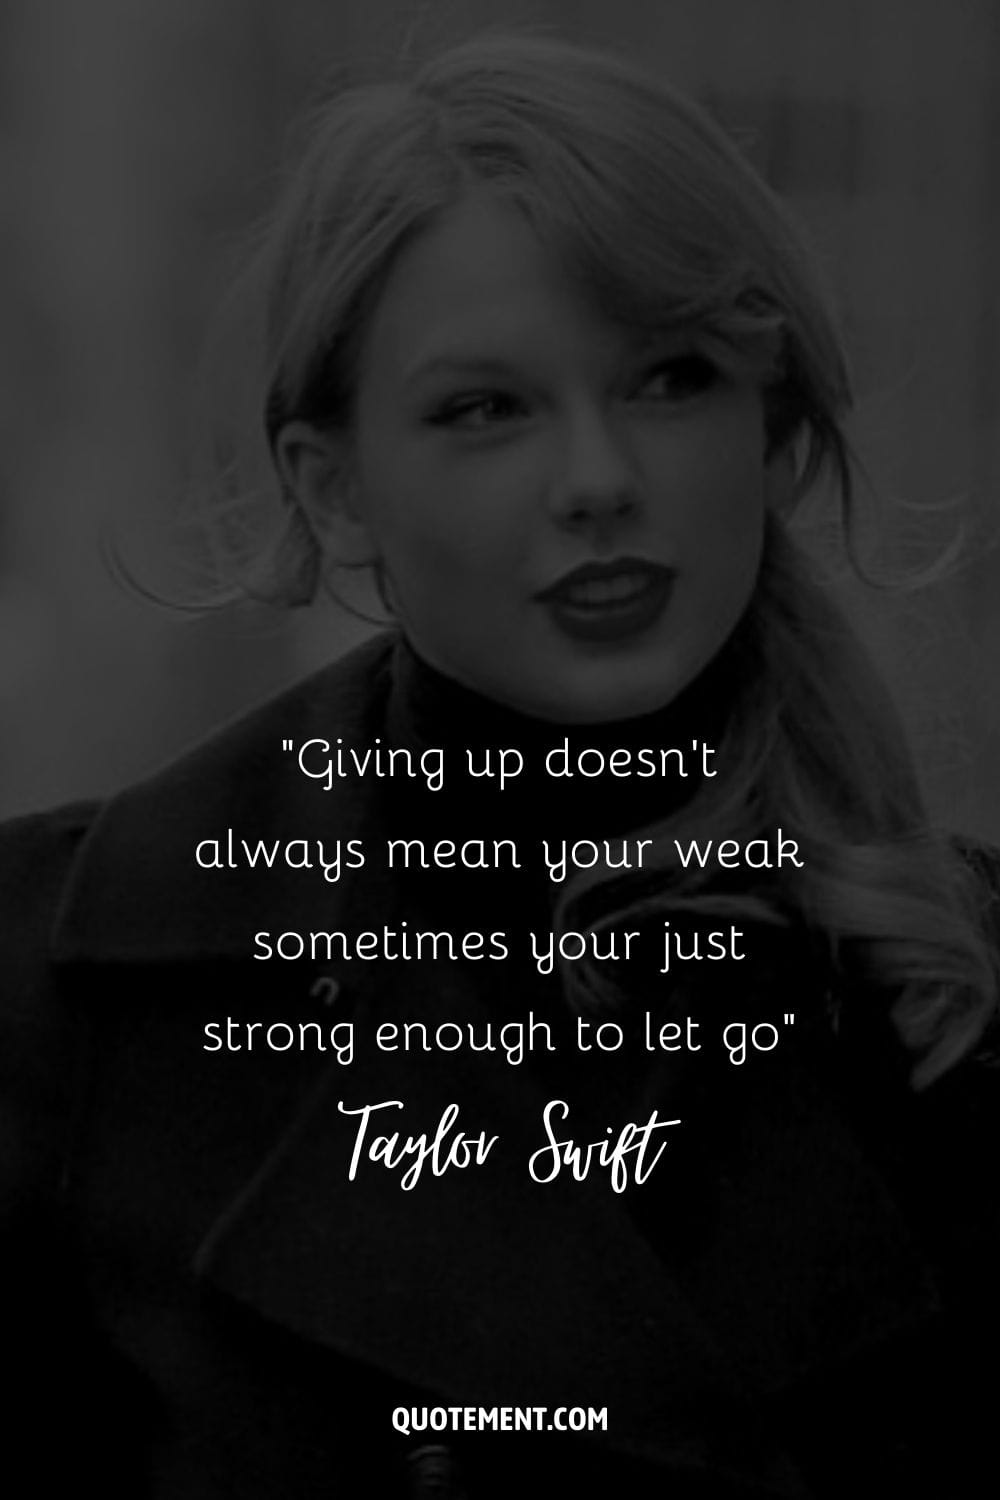 “Giving up doesn't always mean your weak sometimes your just strong enough to let go” ― Taylor Swift